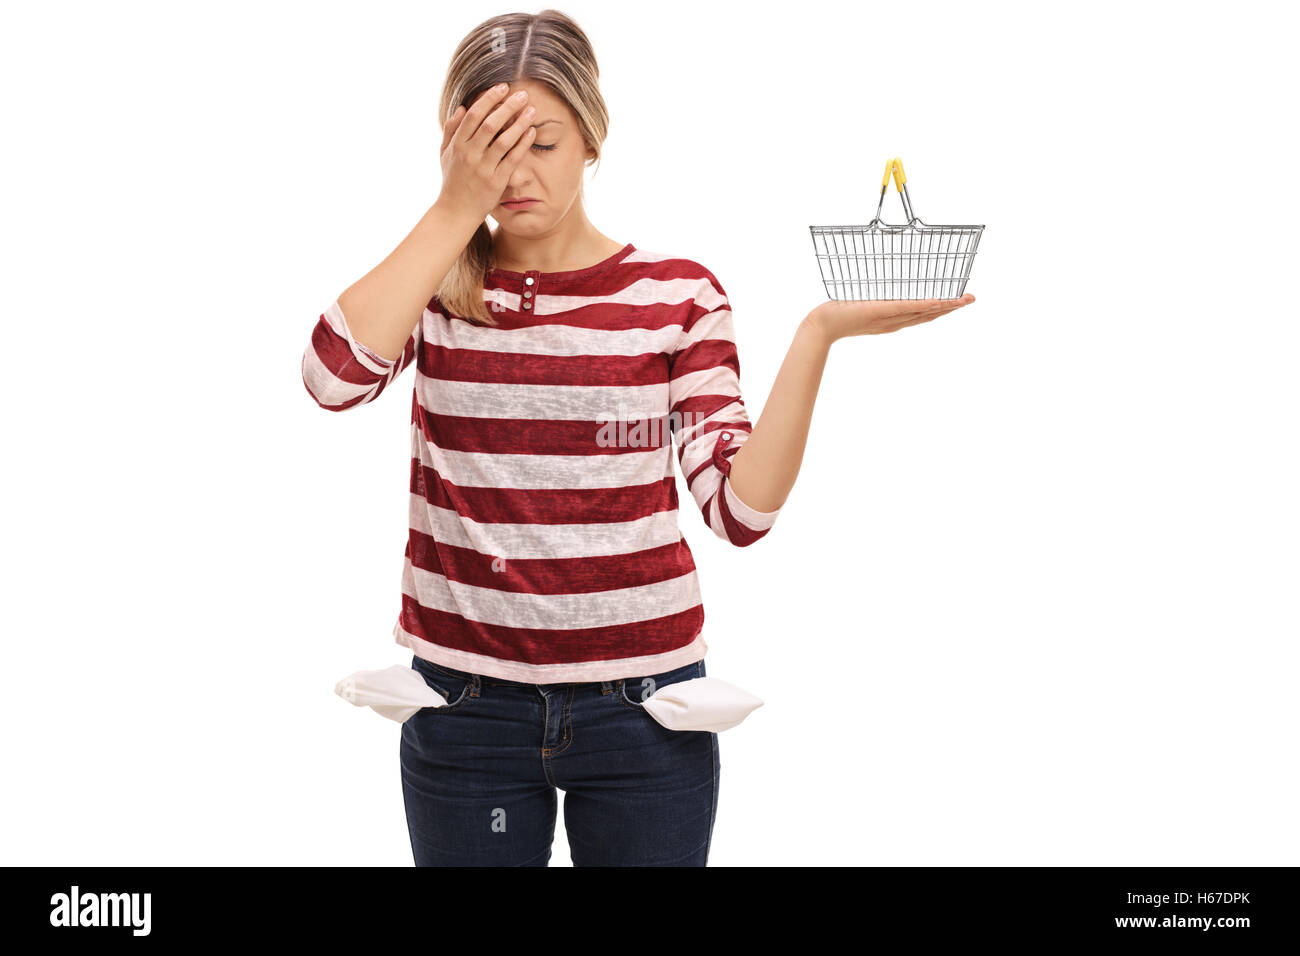 Young woman with empty pockets holding her head in disbelief and holding a small empty shopping basket Stock Photo